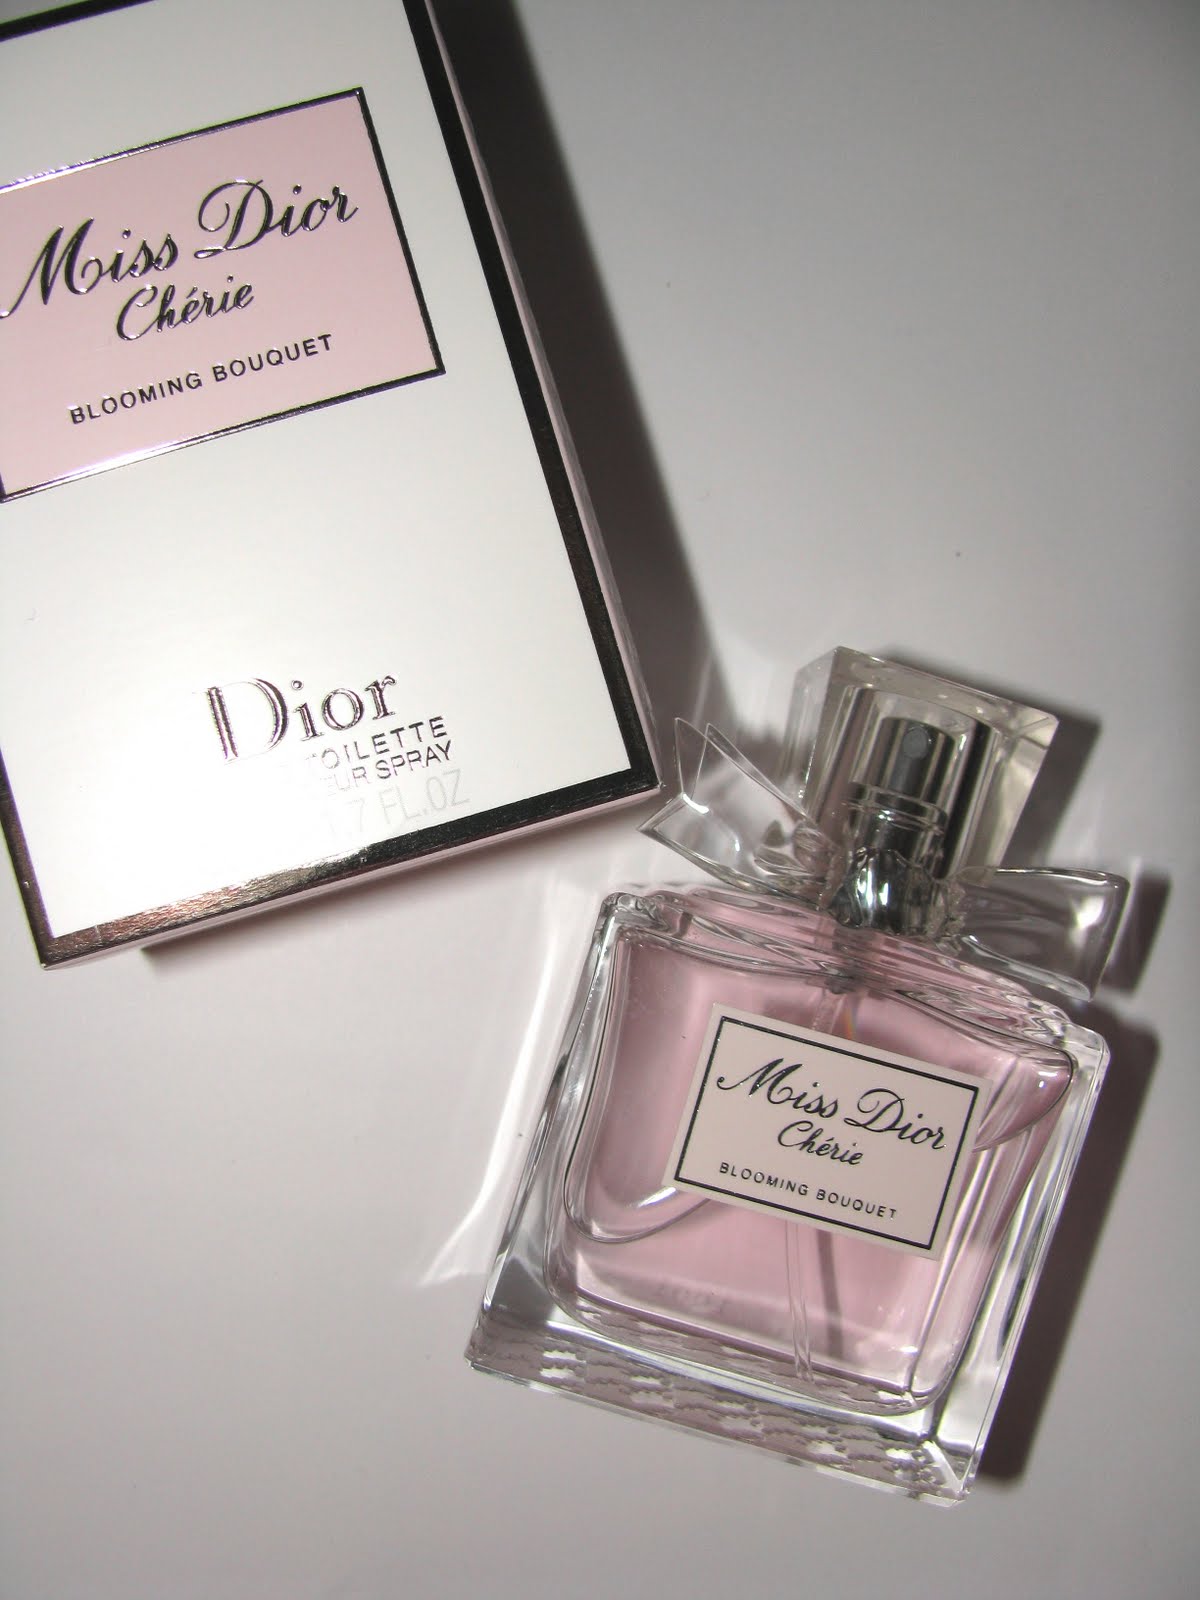 miss dior blooming bouquet review